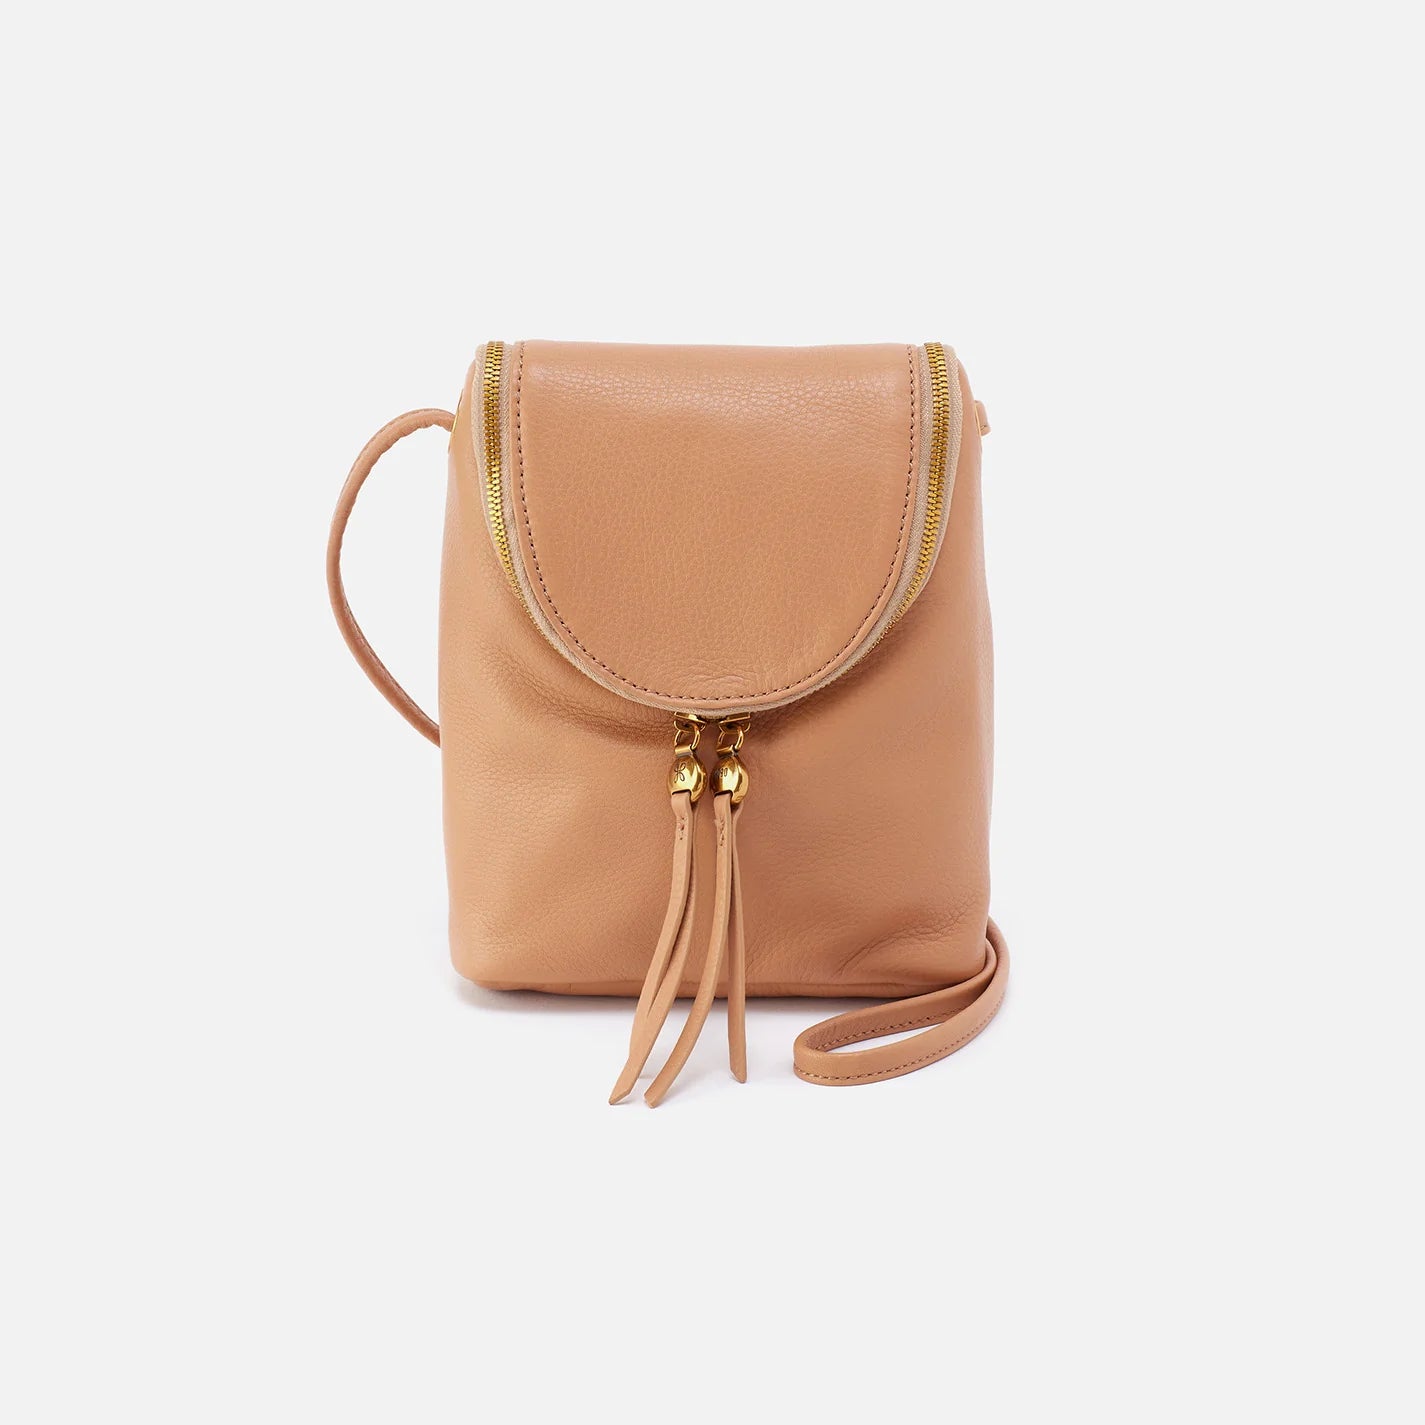 The Fern Crossbody in sandstorm has a double-zipper closure for easy access, an endlessly adjustable strap, and an exterior slip pocket for your phone. Check it out at the Painted Cottage in Edgewater, MD